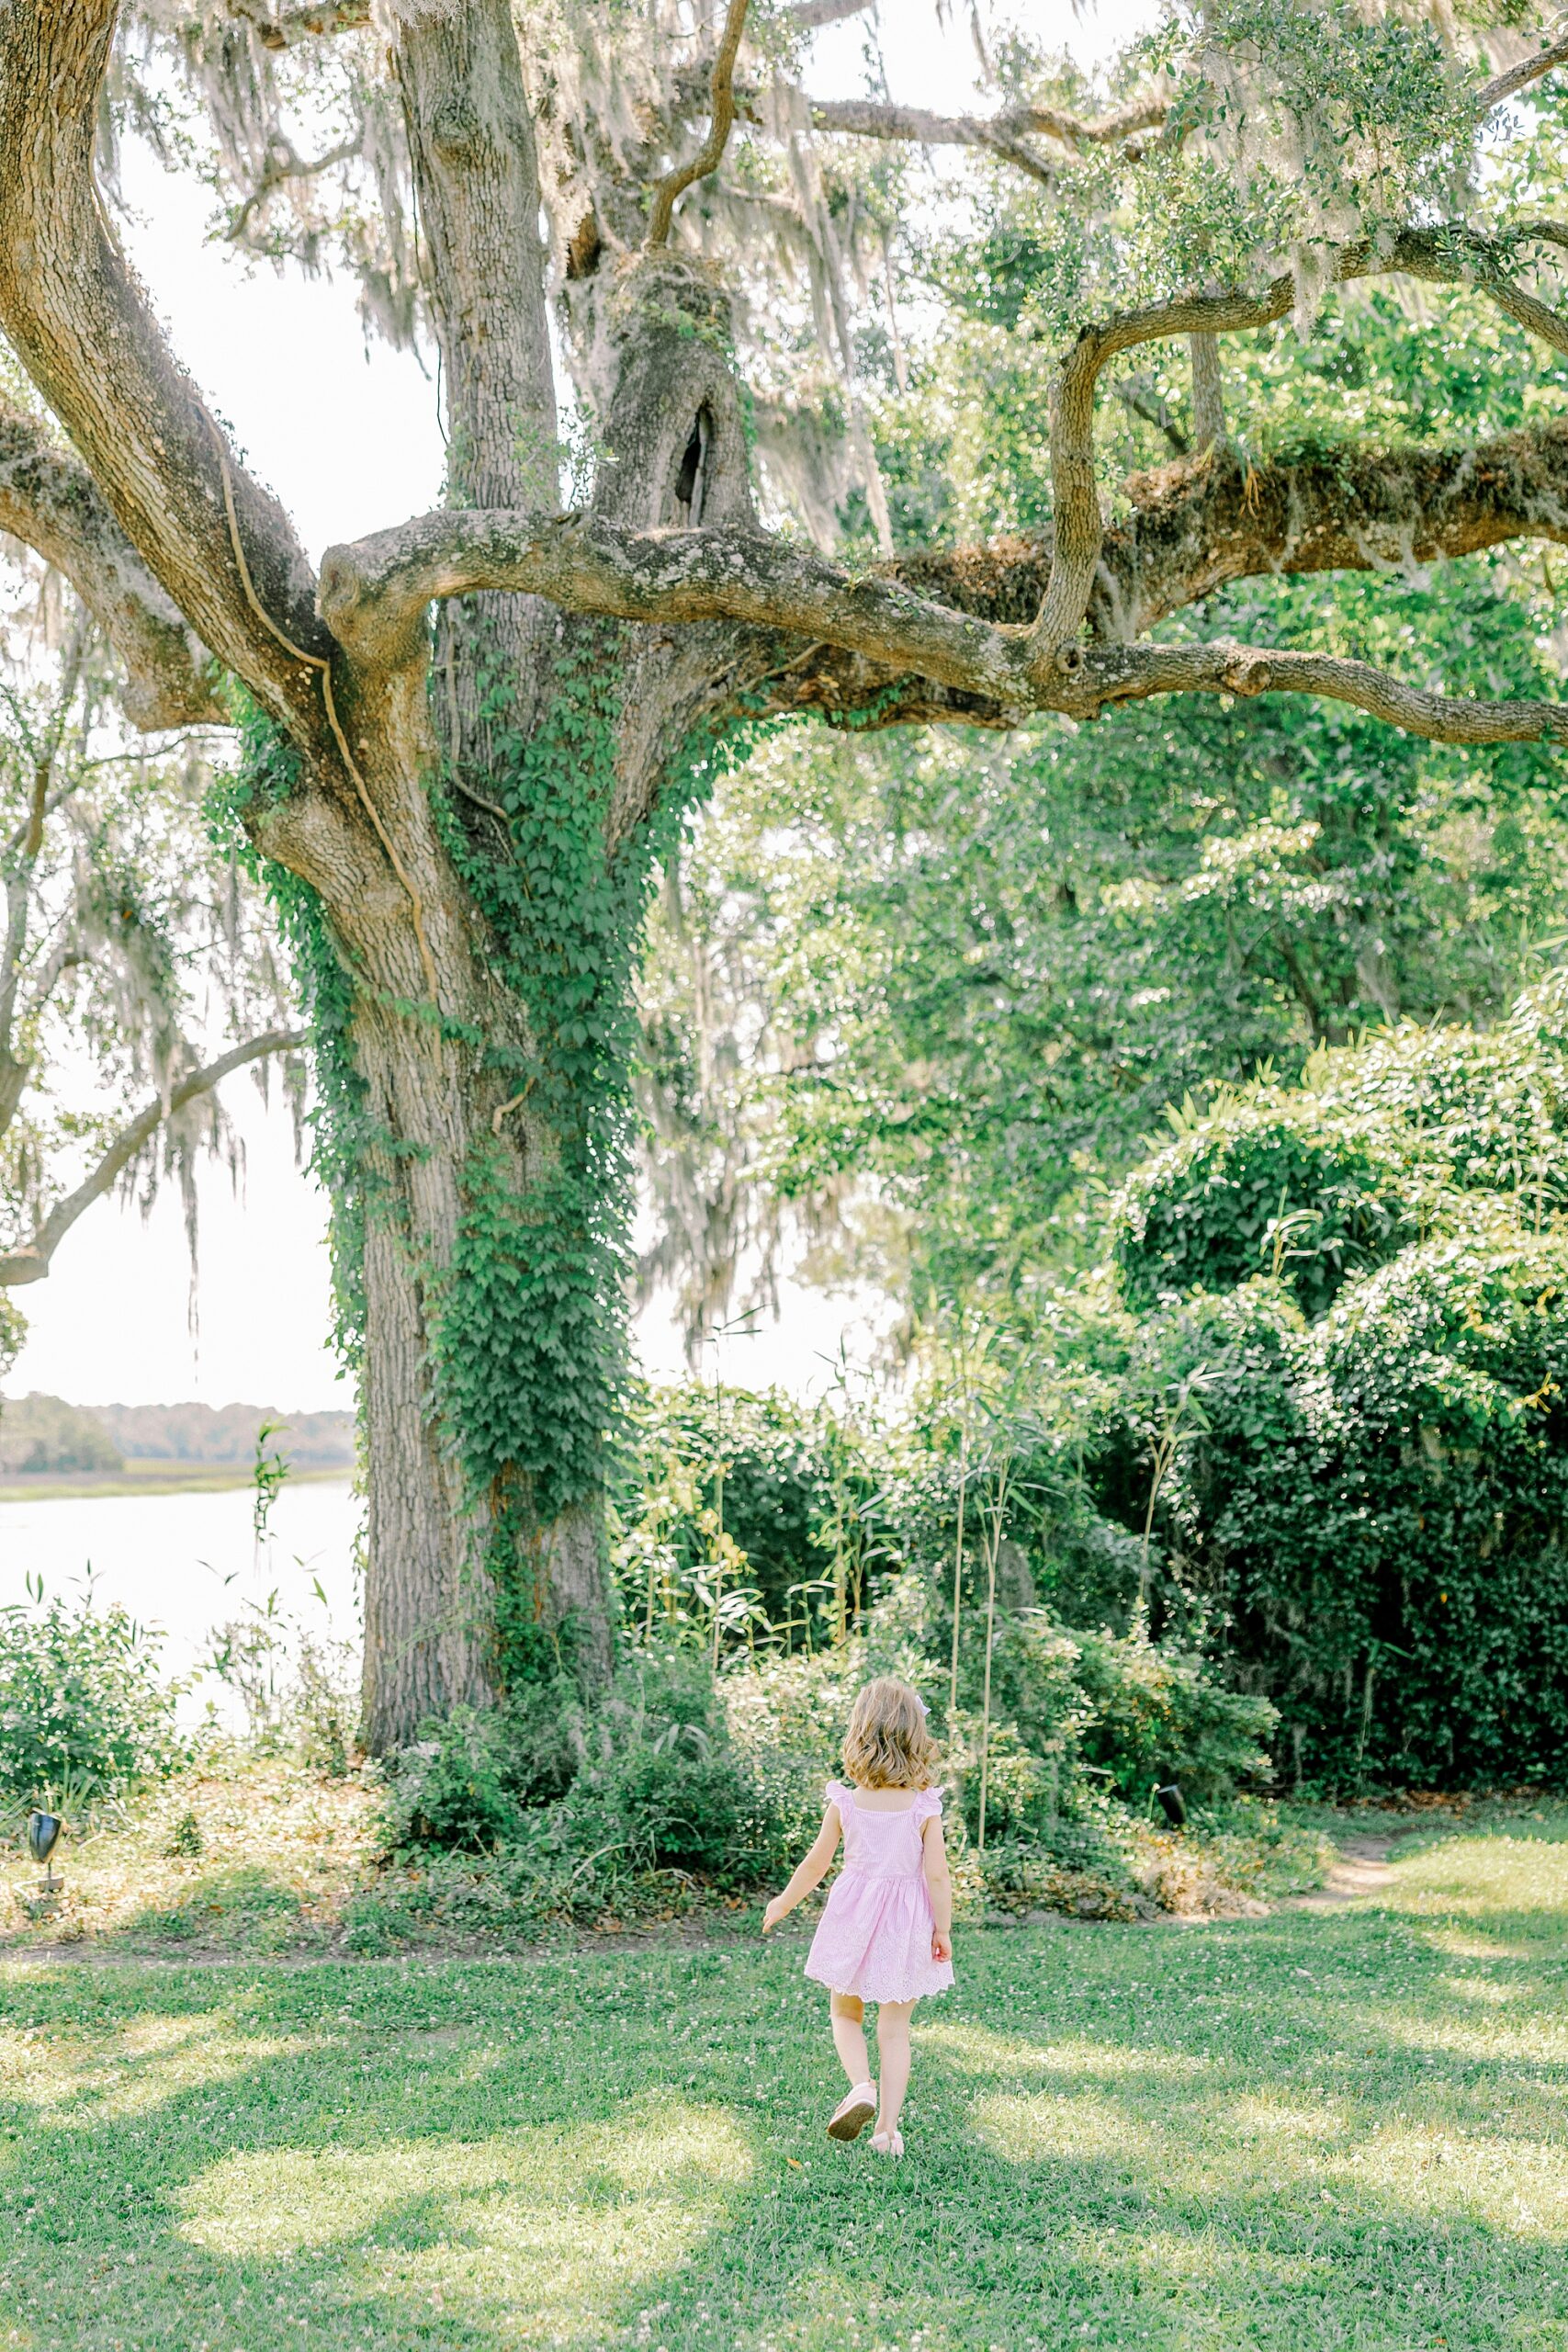 young girl in pink dress dances under tree with Spanish moss